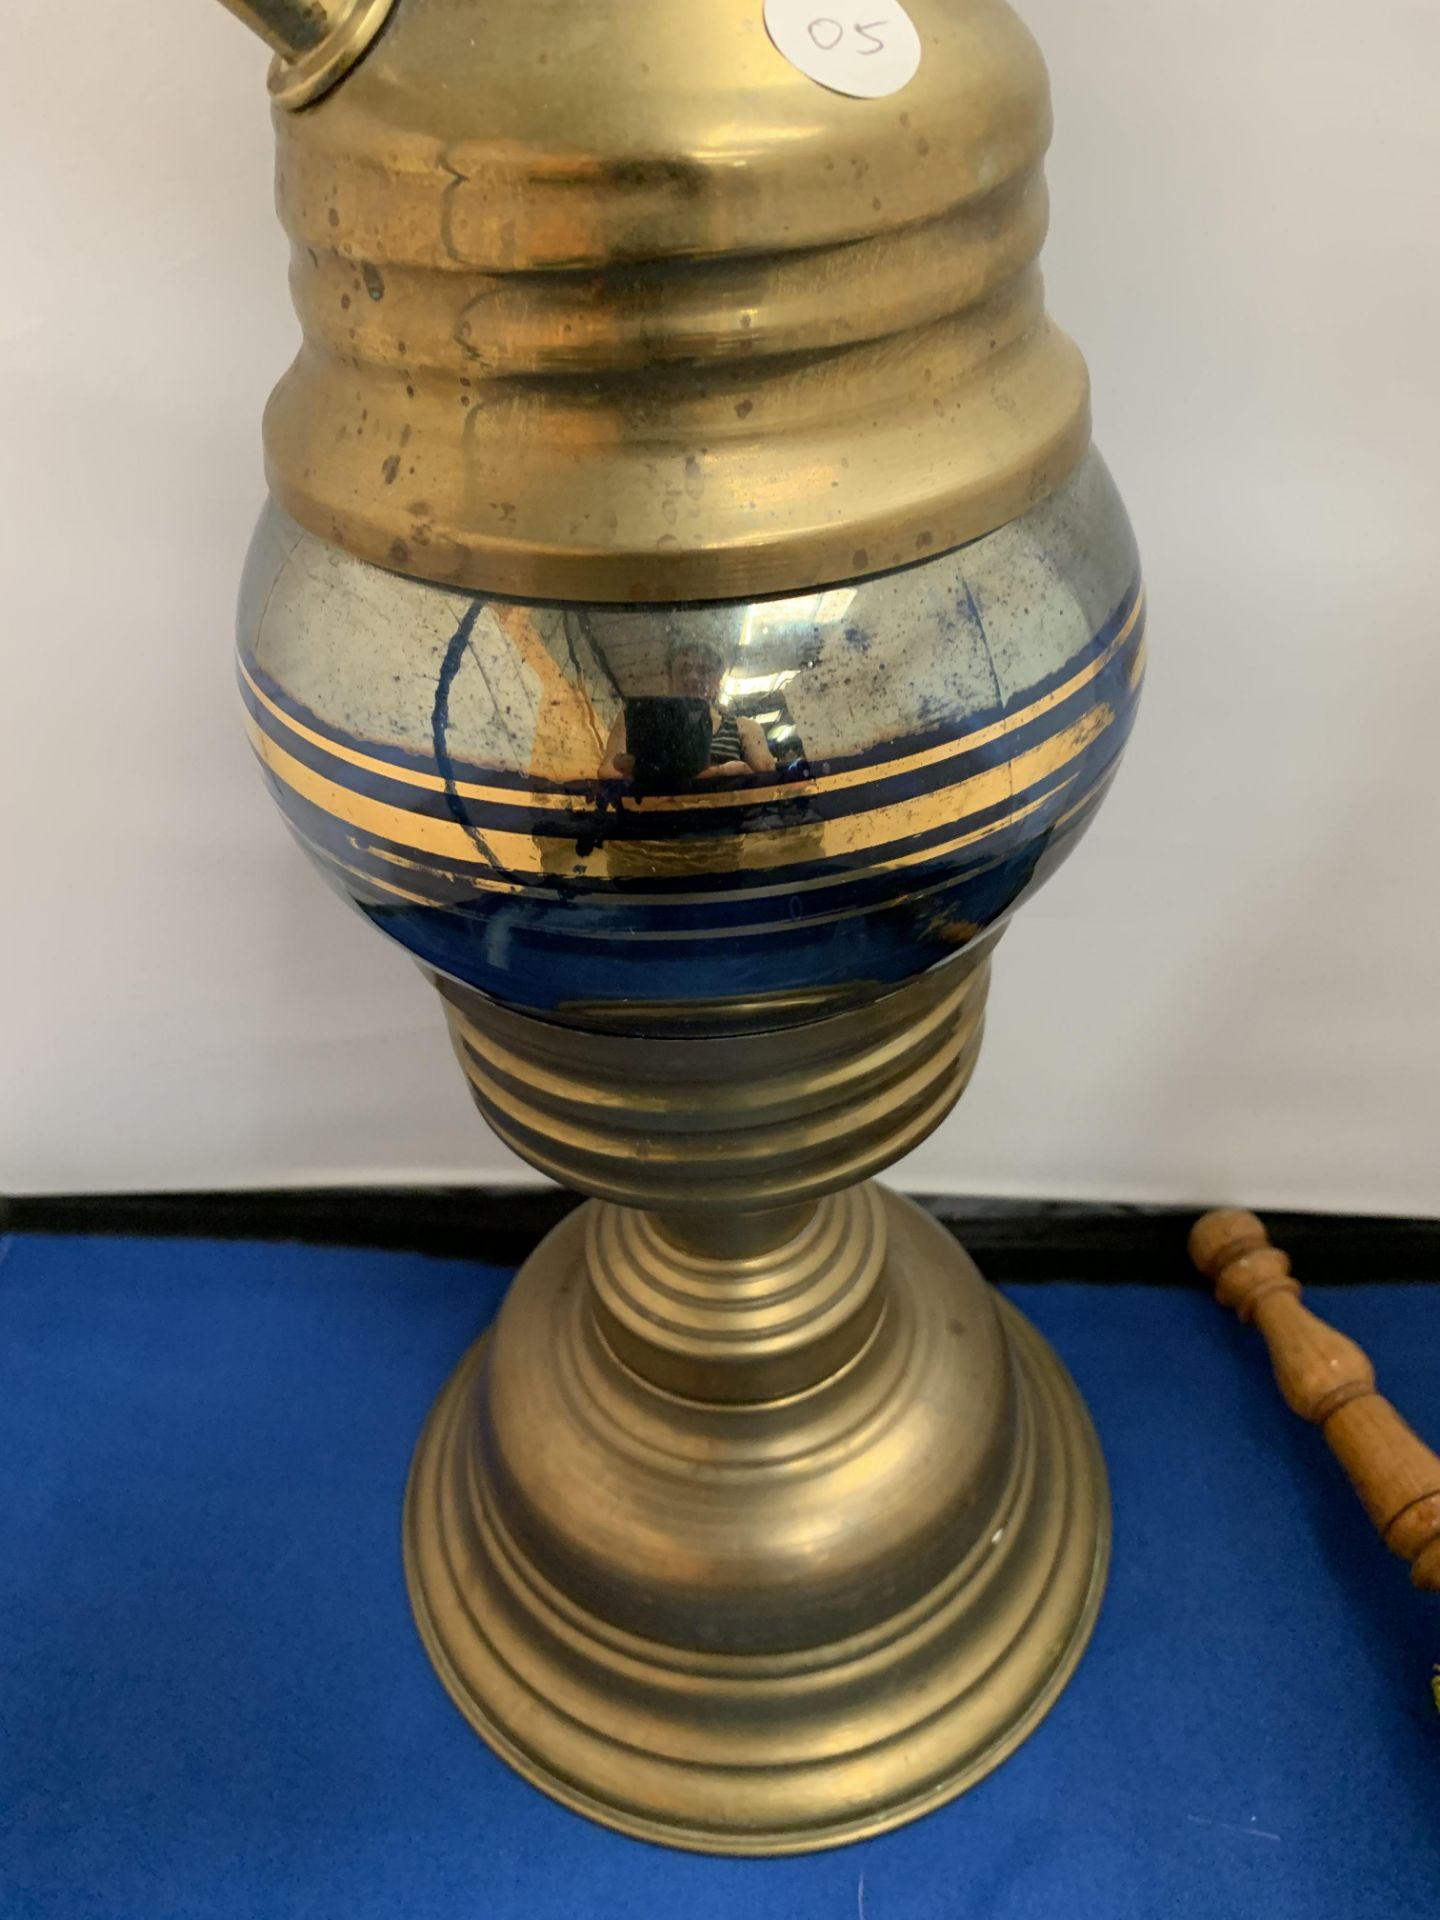 A BRASS SHISHA PIPE WITH A BLUE BRAIDED PIPE - Image 3 of 5